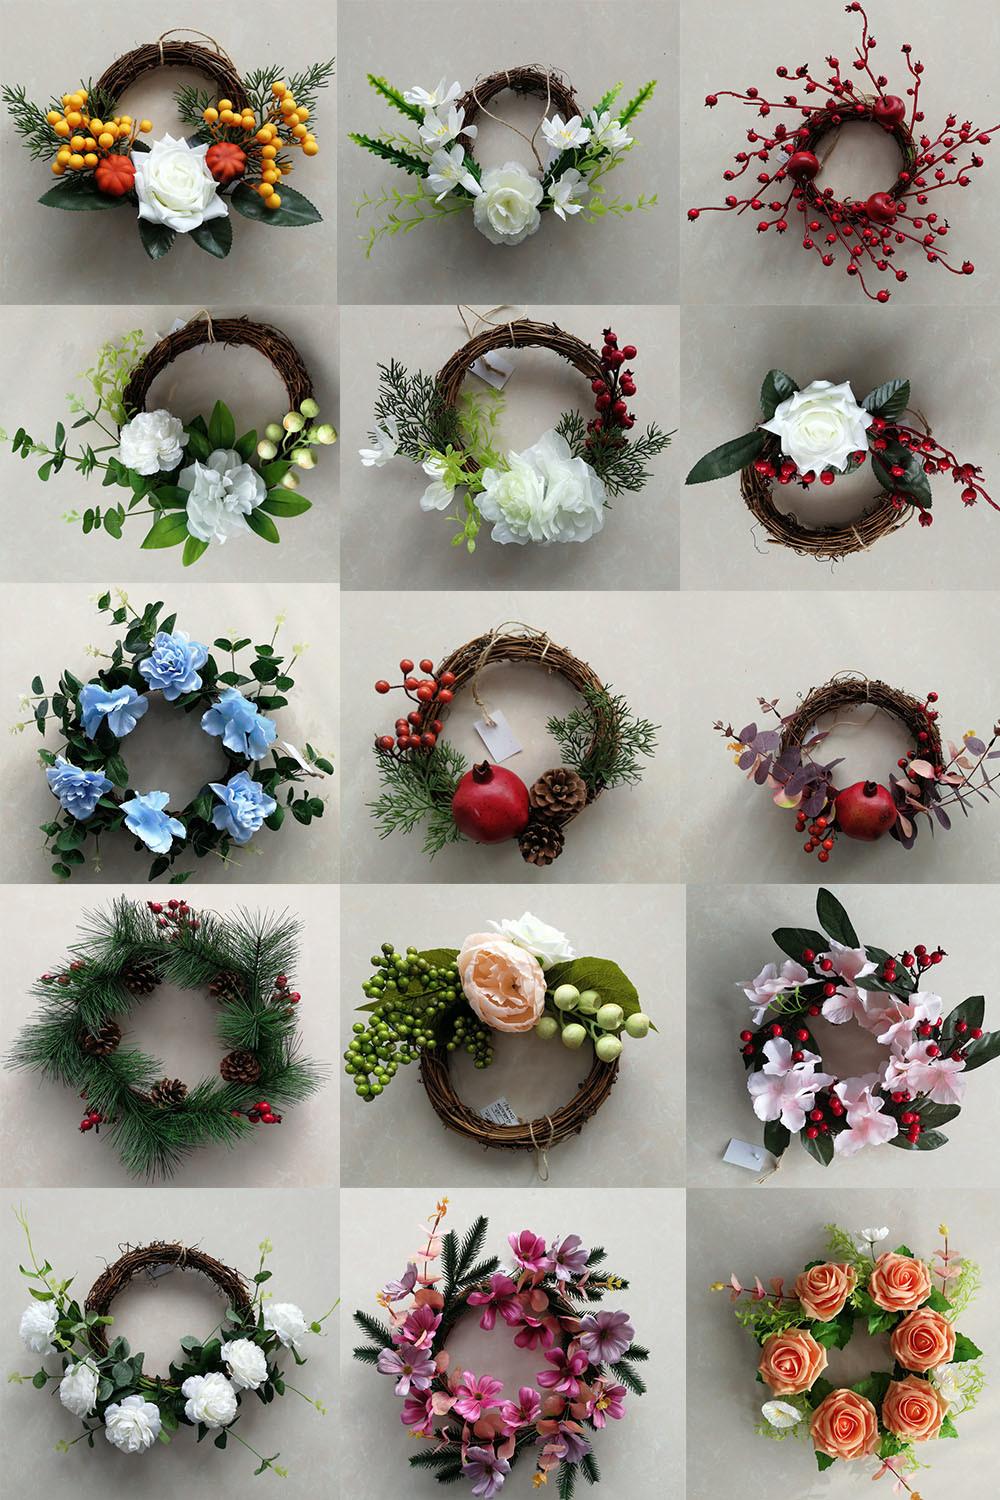 Home and Festival and Mall Decoration Fsc BSCI Artificial Berry Christmas Wreath